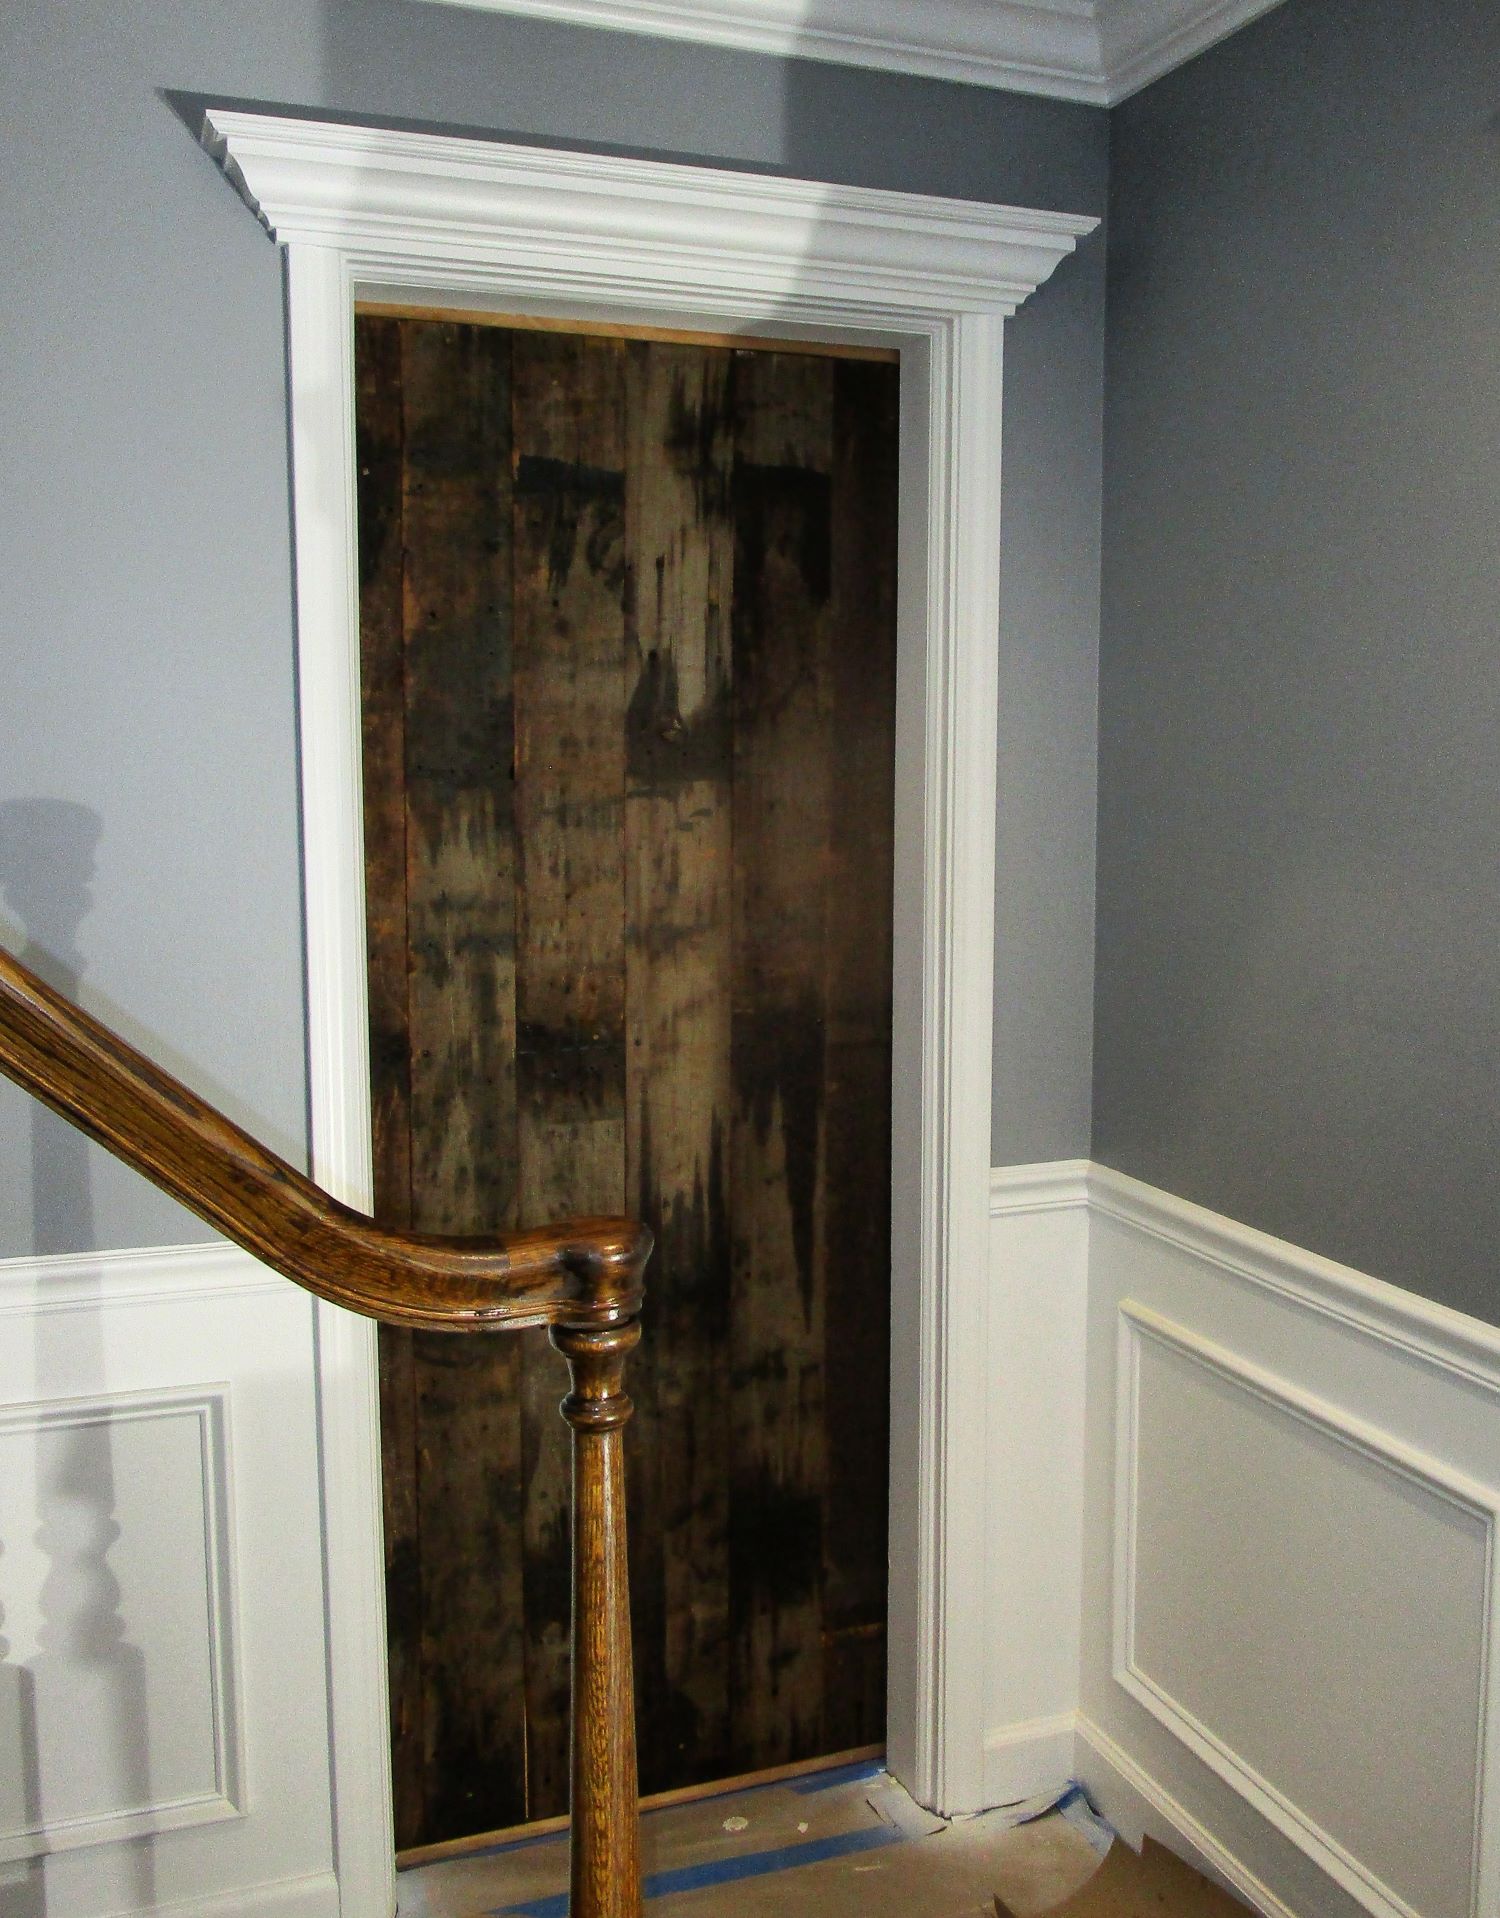 A reclaimed wood sliding door for a customer's home office